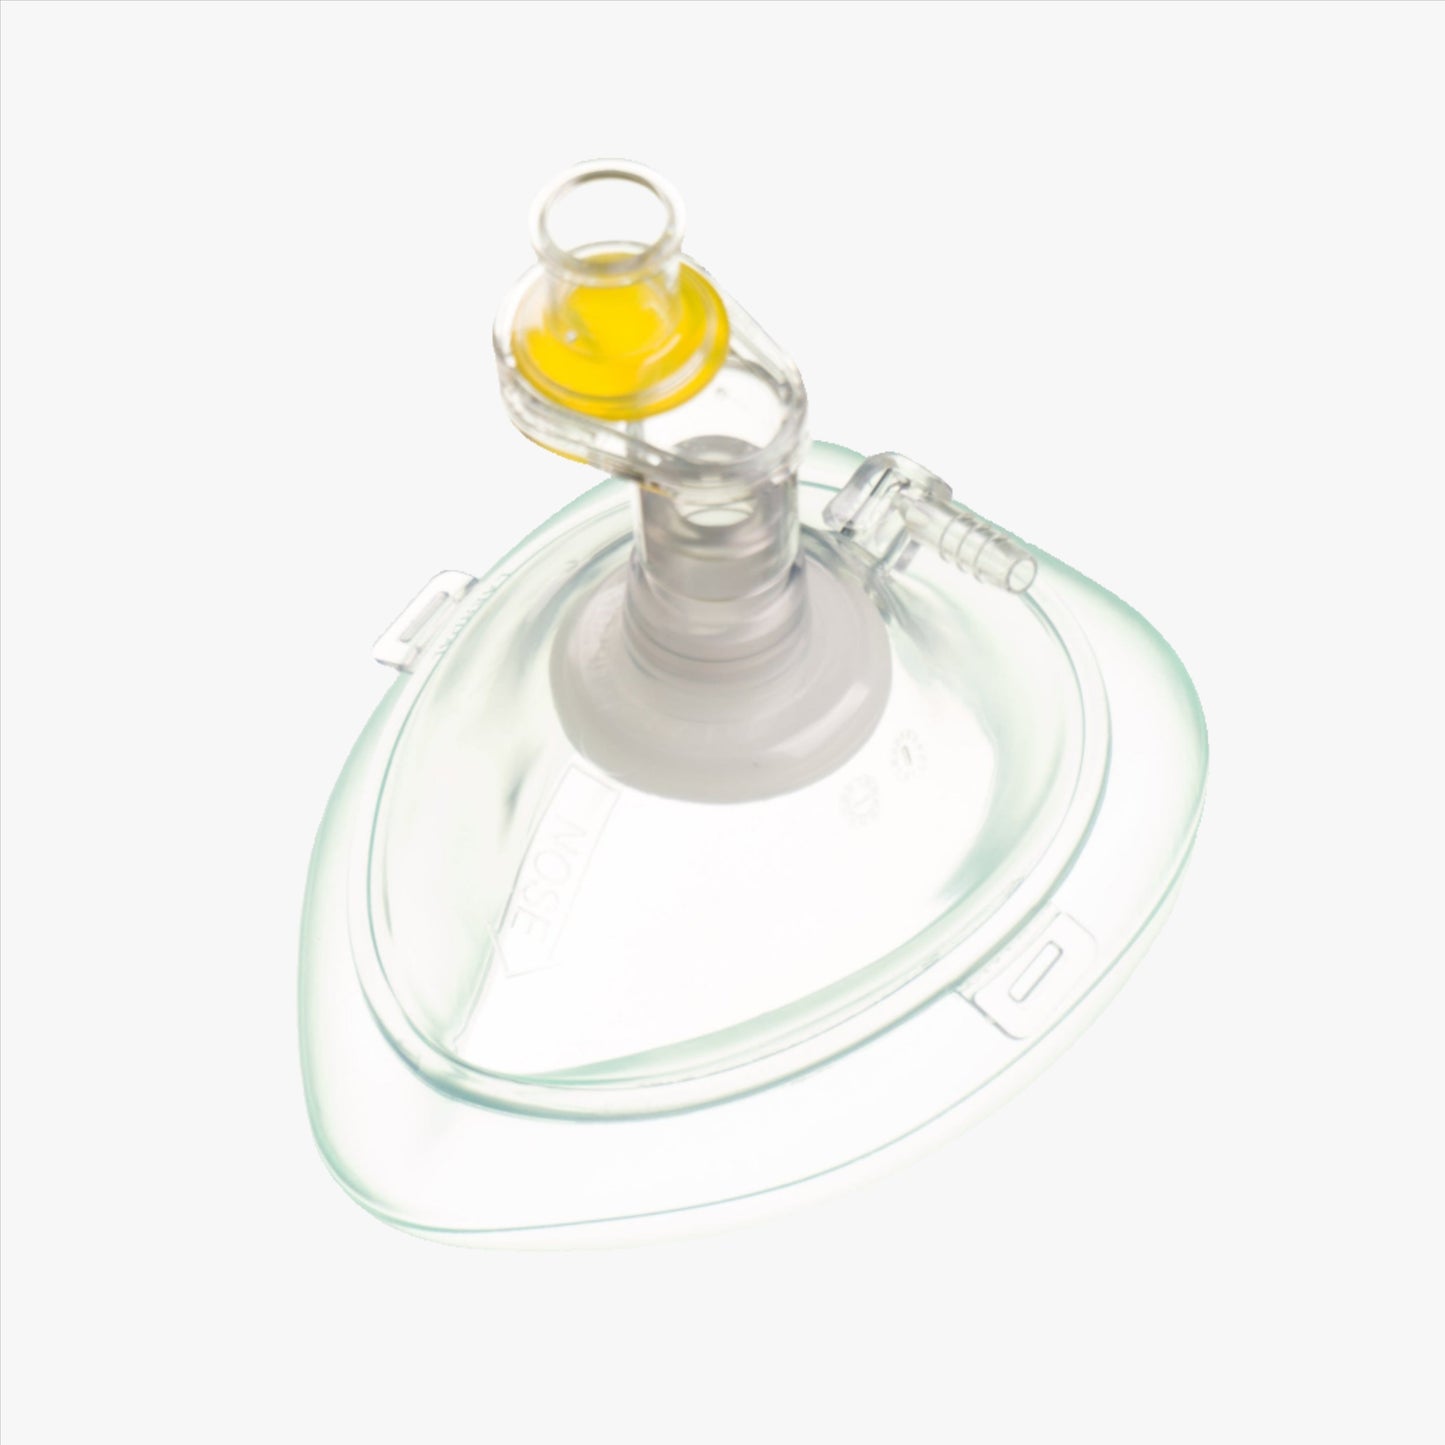 Laerdal Pocket mask with valve and oxygen nipple